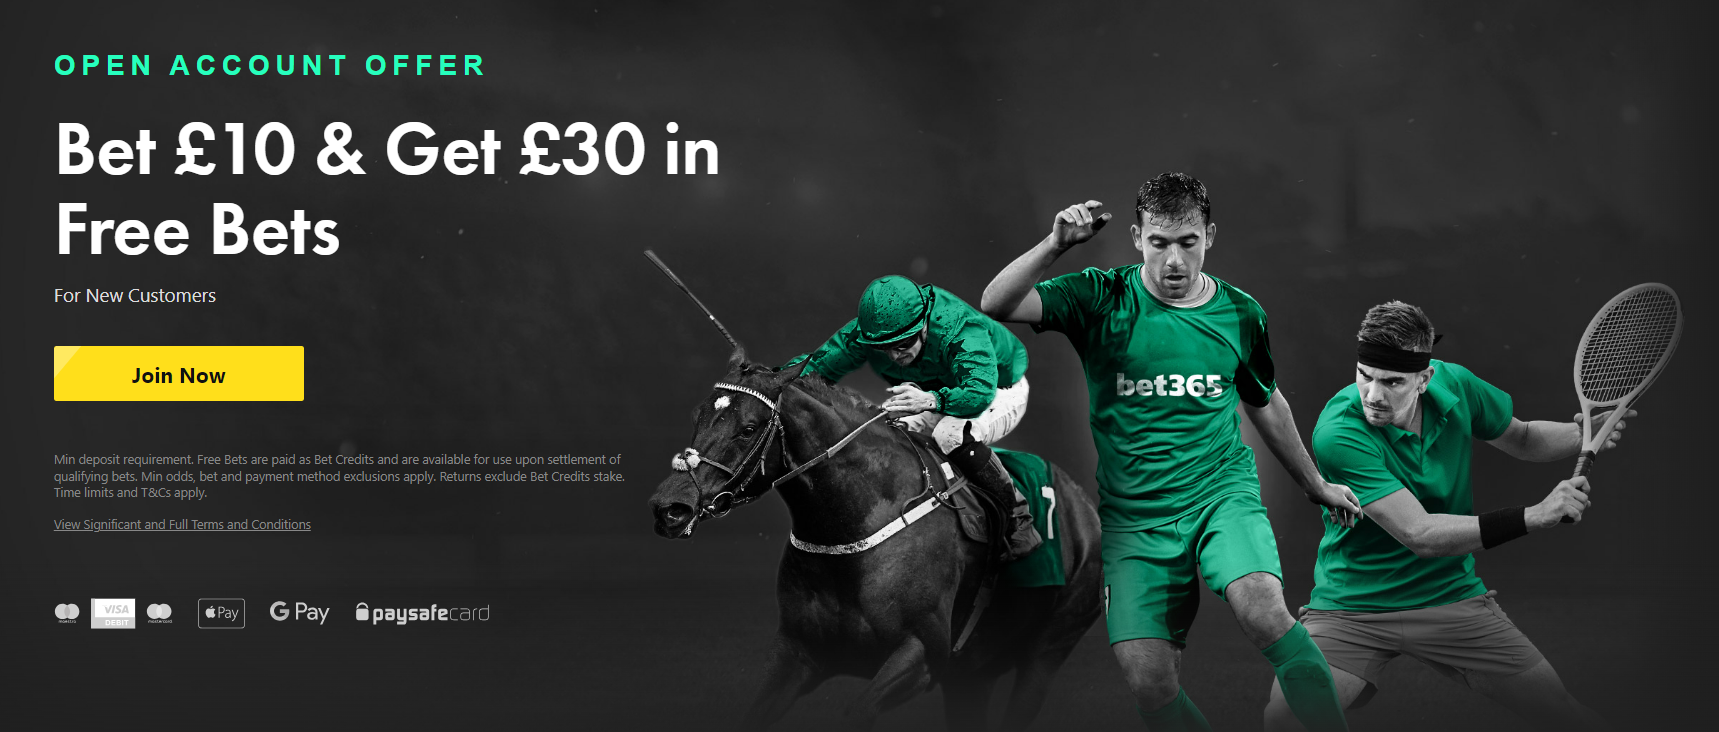 new betting account offers